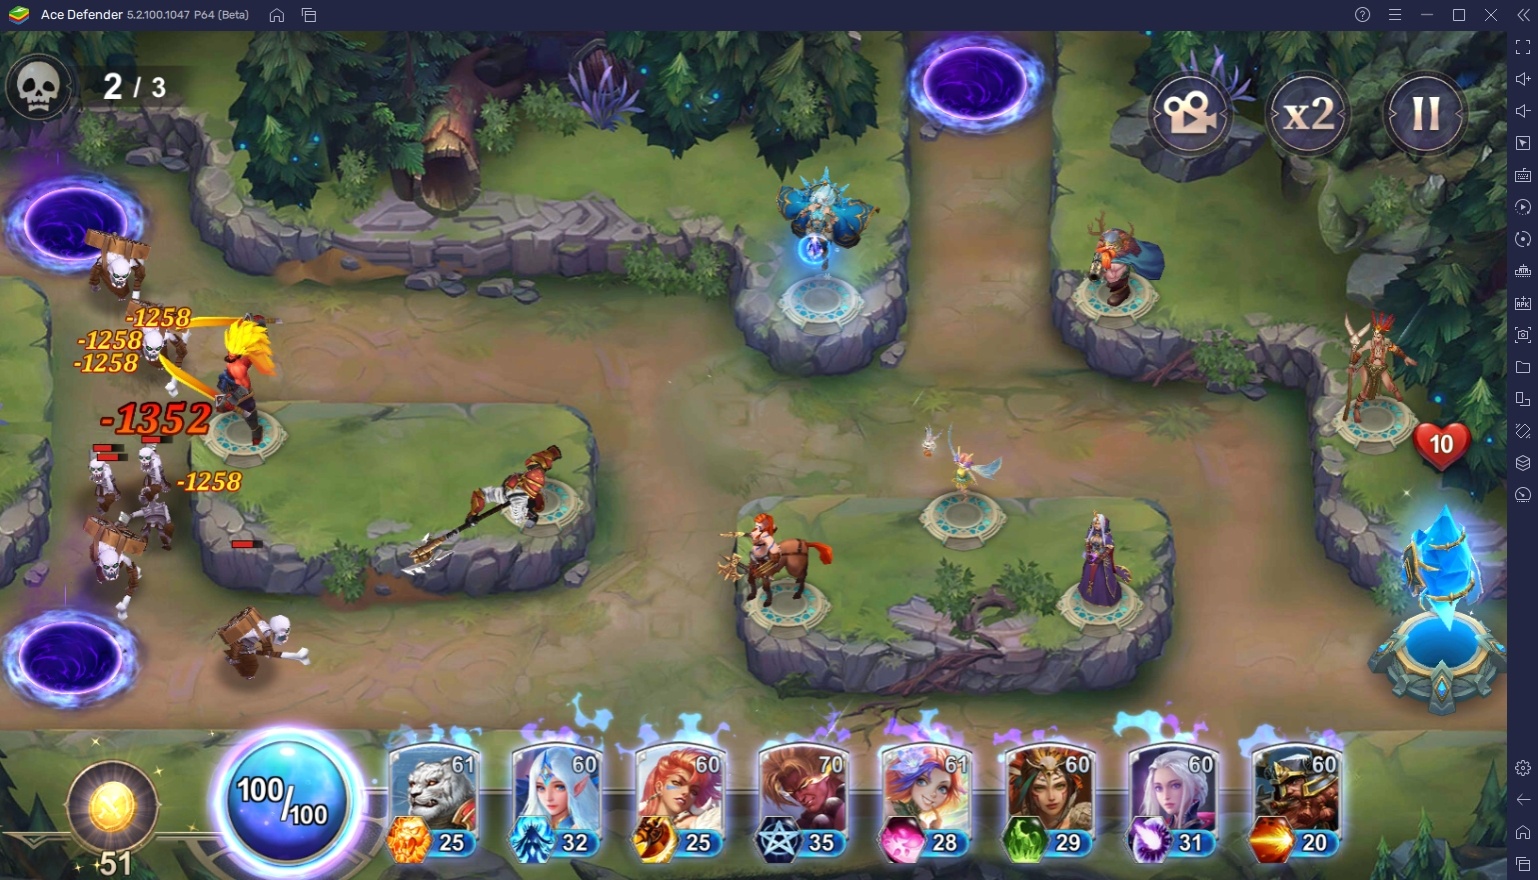 BlueStacks' Beginners Guide to Playing Ace Defender